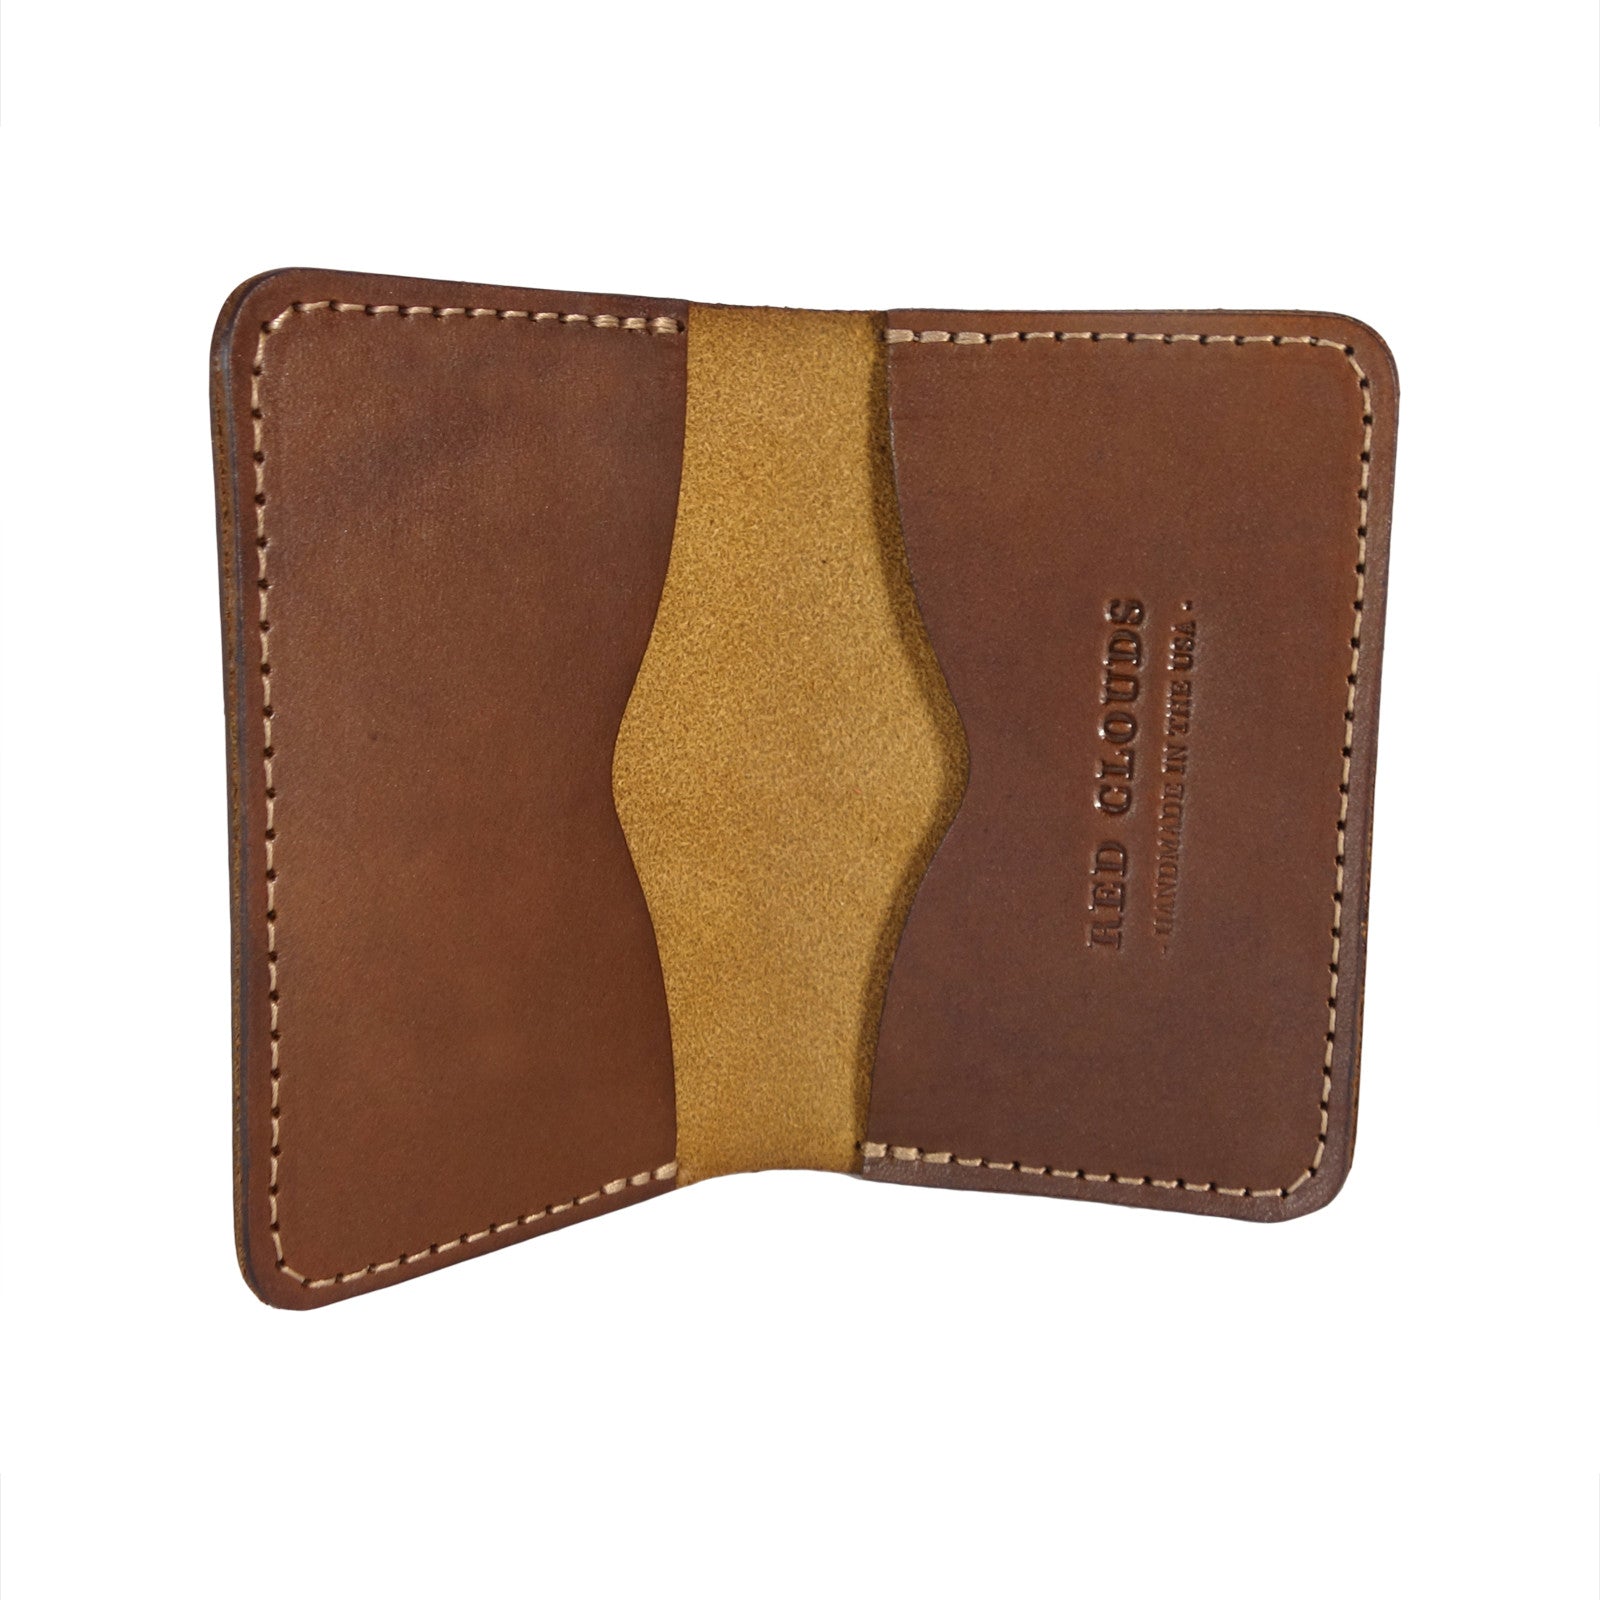 Frontside wallet. Card wallet. slim card case. leather card wallet. For those who like to keep their wallets in their front pockets. Slim enough to comfortably carry and large enough to fit your essential cards and some cash.  3/4oz Herman Oak Vegetable-Tanned Leather 2 Card-Slots